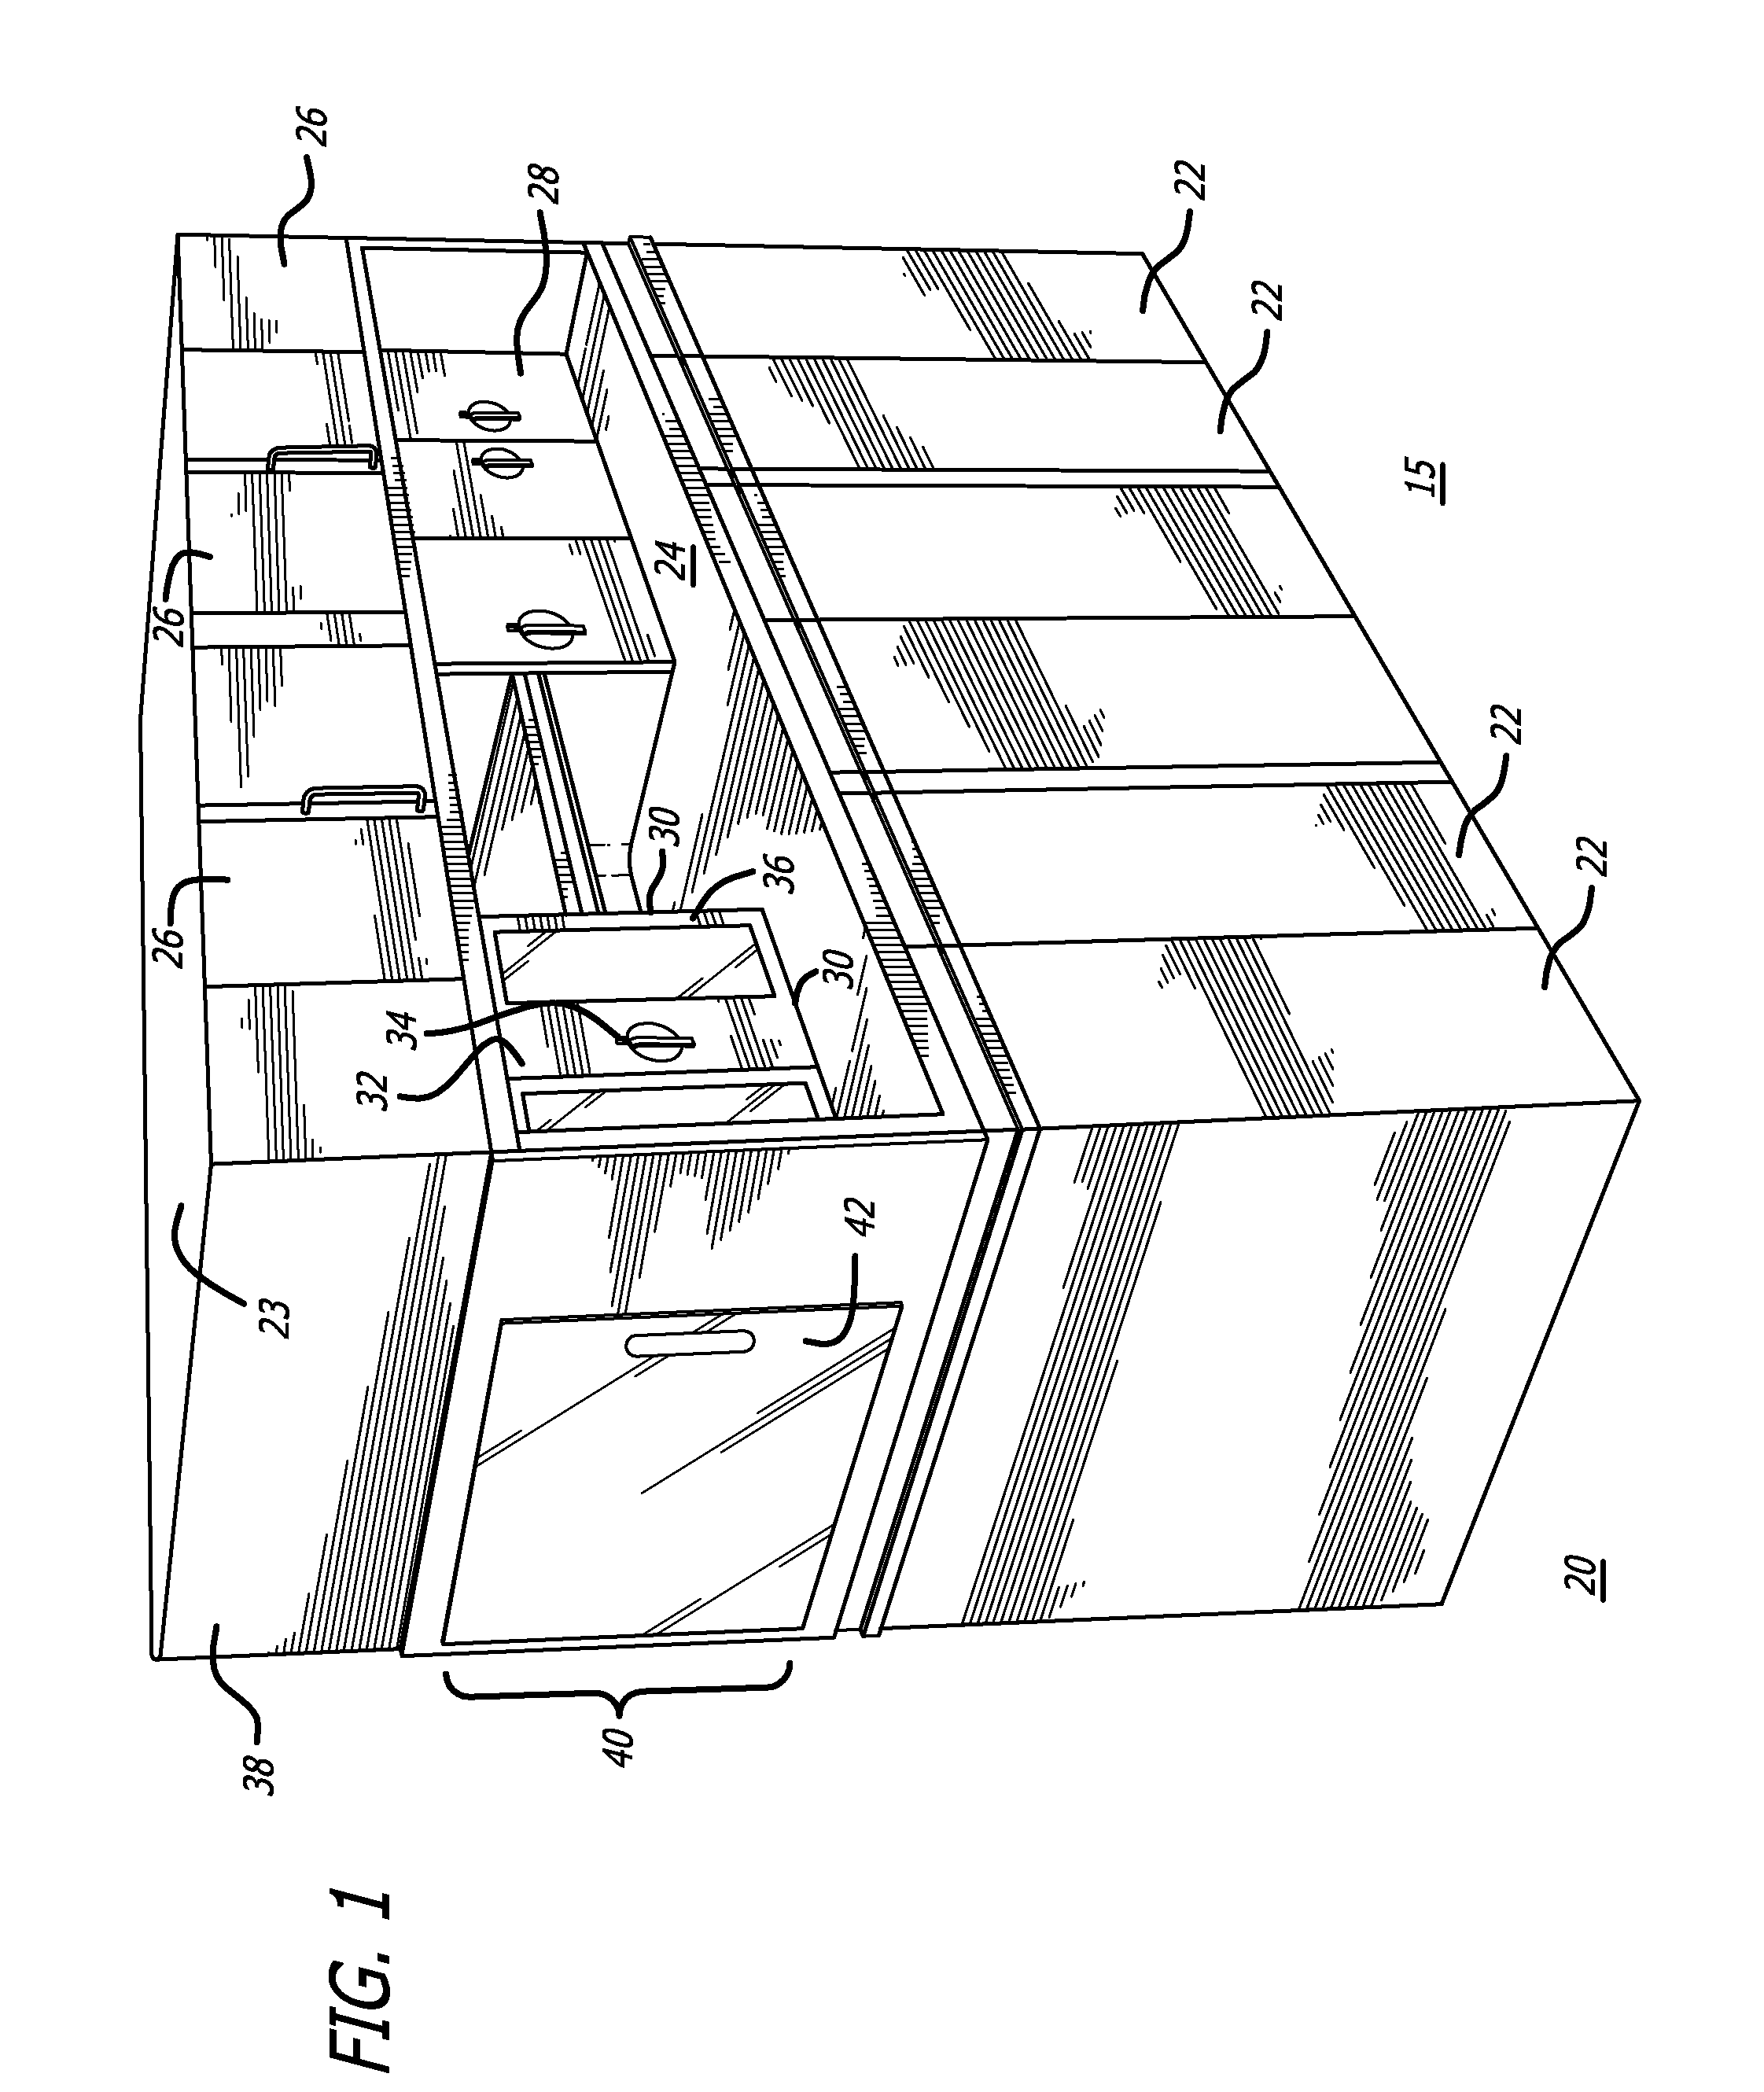 Convertible aircraft galley refrigerator/chiller with side door access